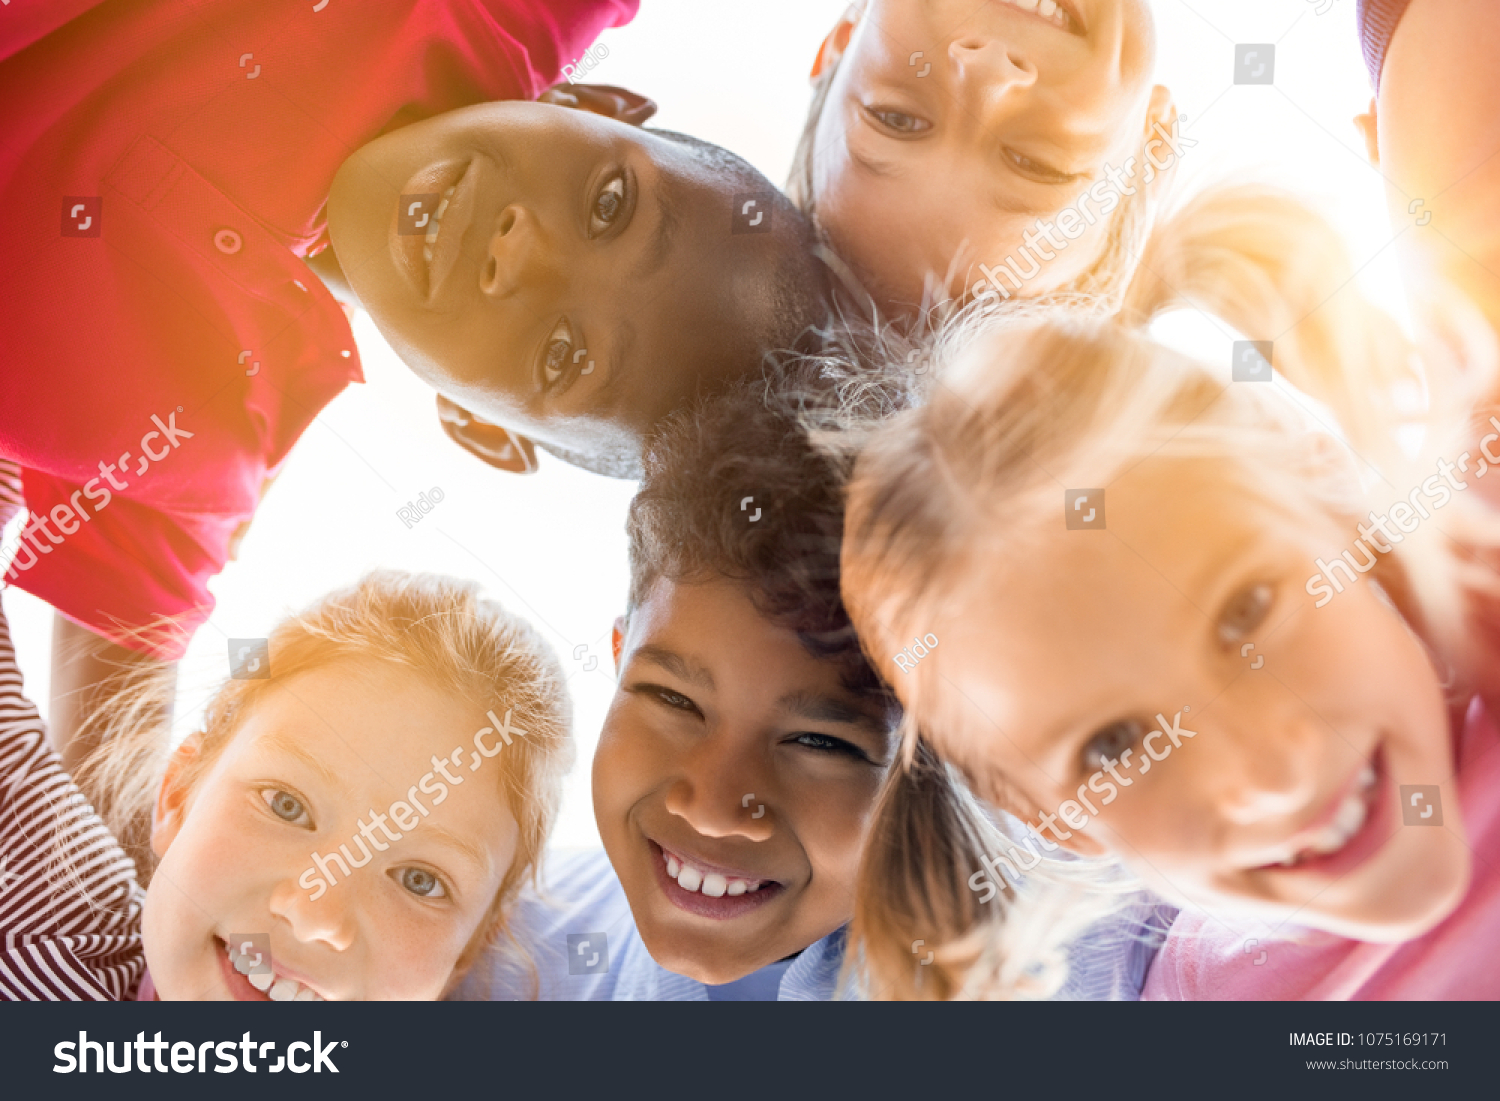 Portrait of happy kids in circle looking down and embracing. Group of five multiethnic friends outdoor looking at camera and smiling. Closeup face of children looking at camera together at park. #1075169171